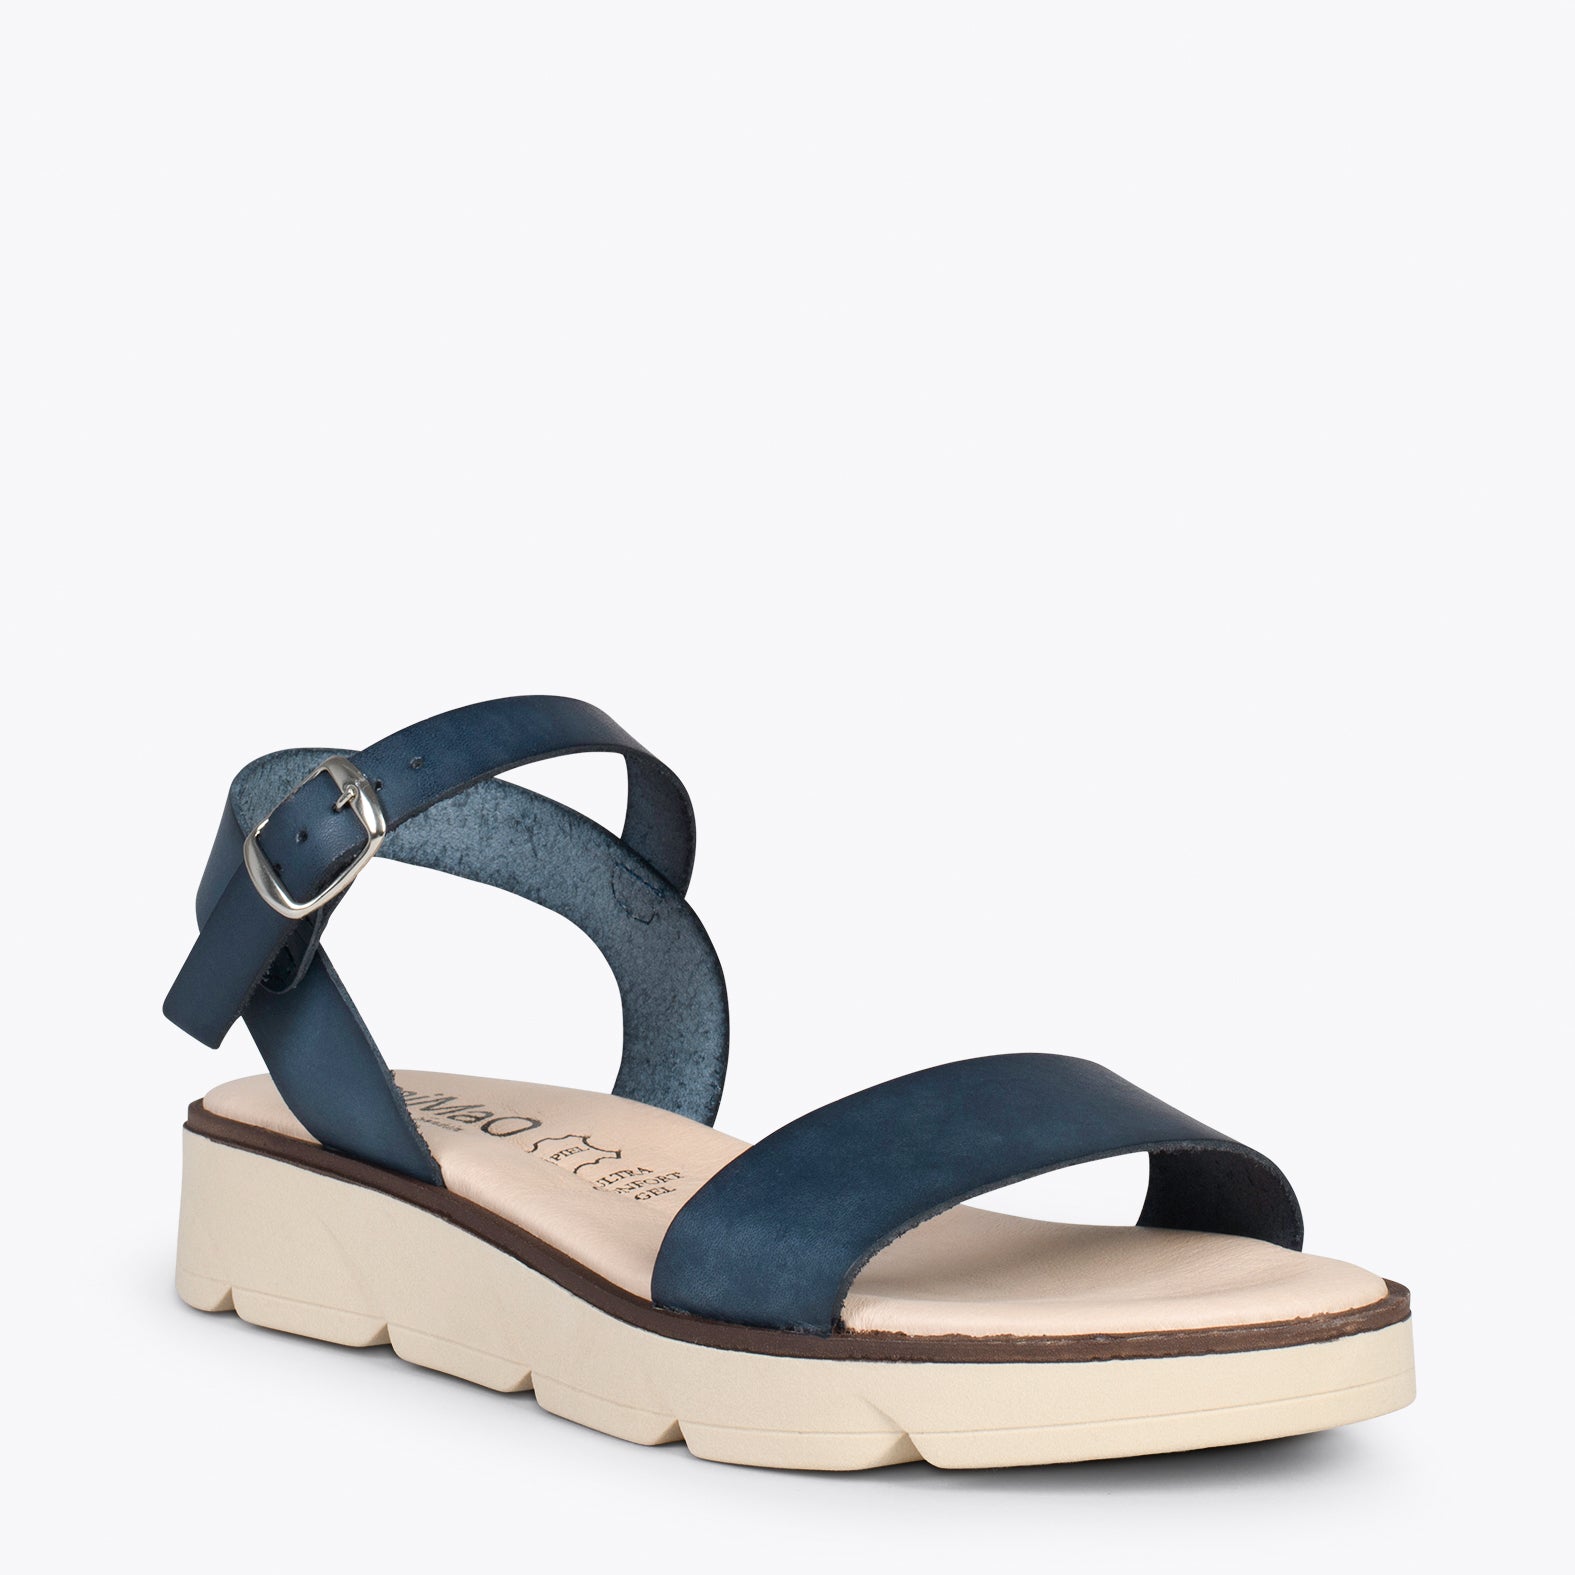 RIVER – NAVY leather flat sandals with wedge